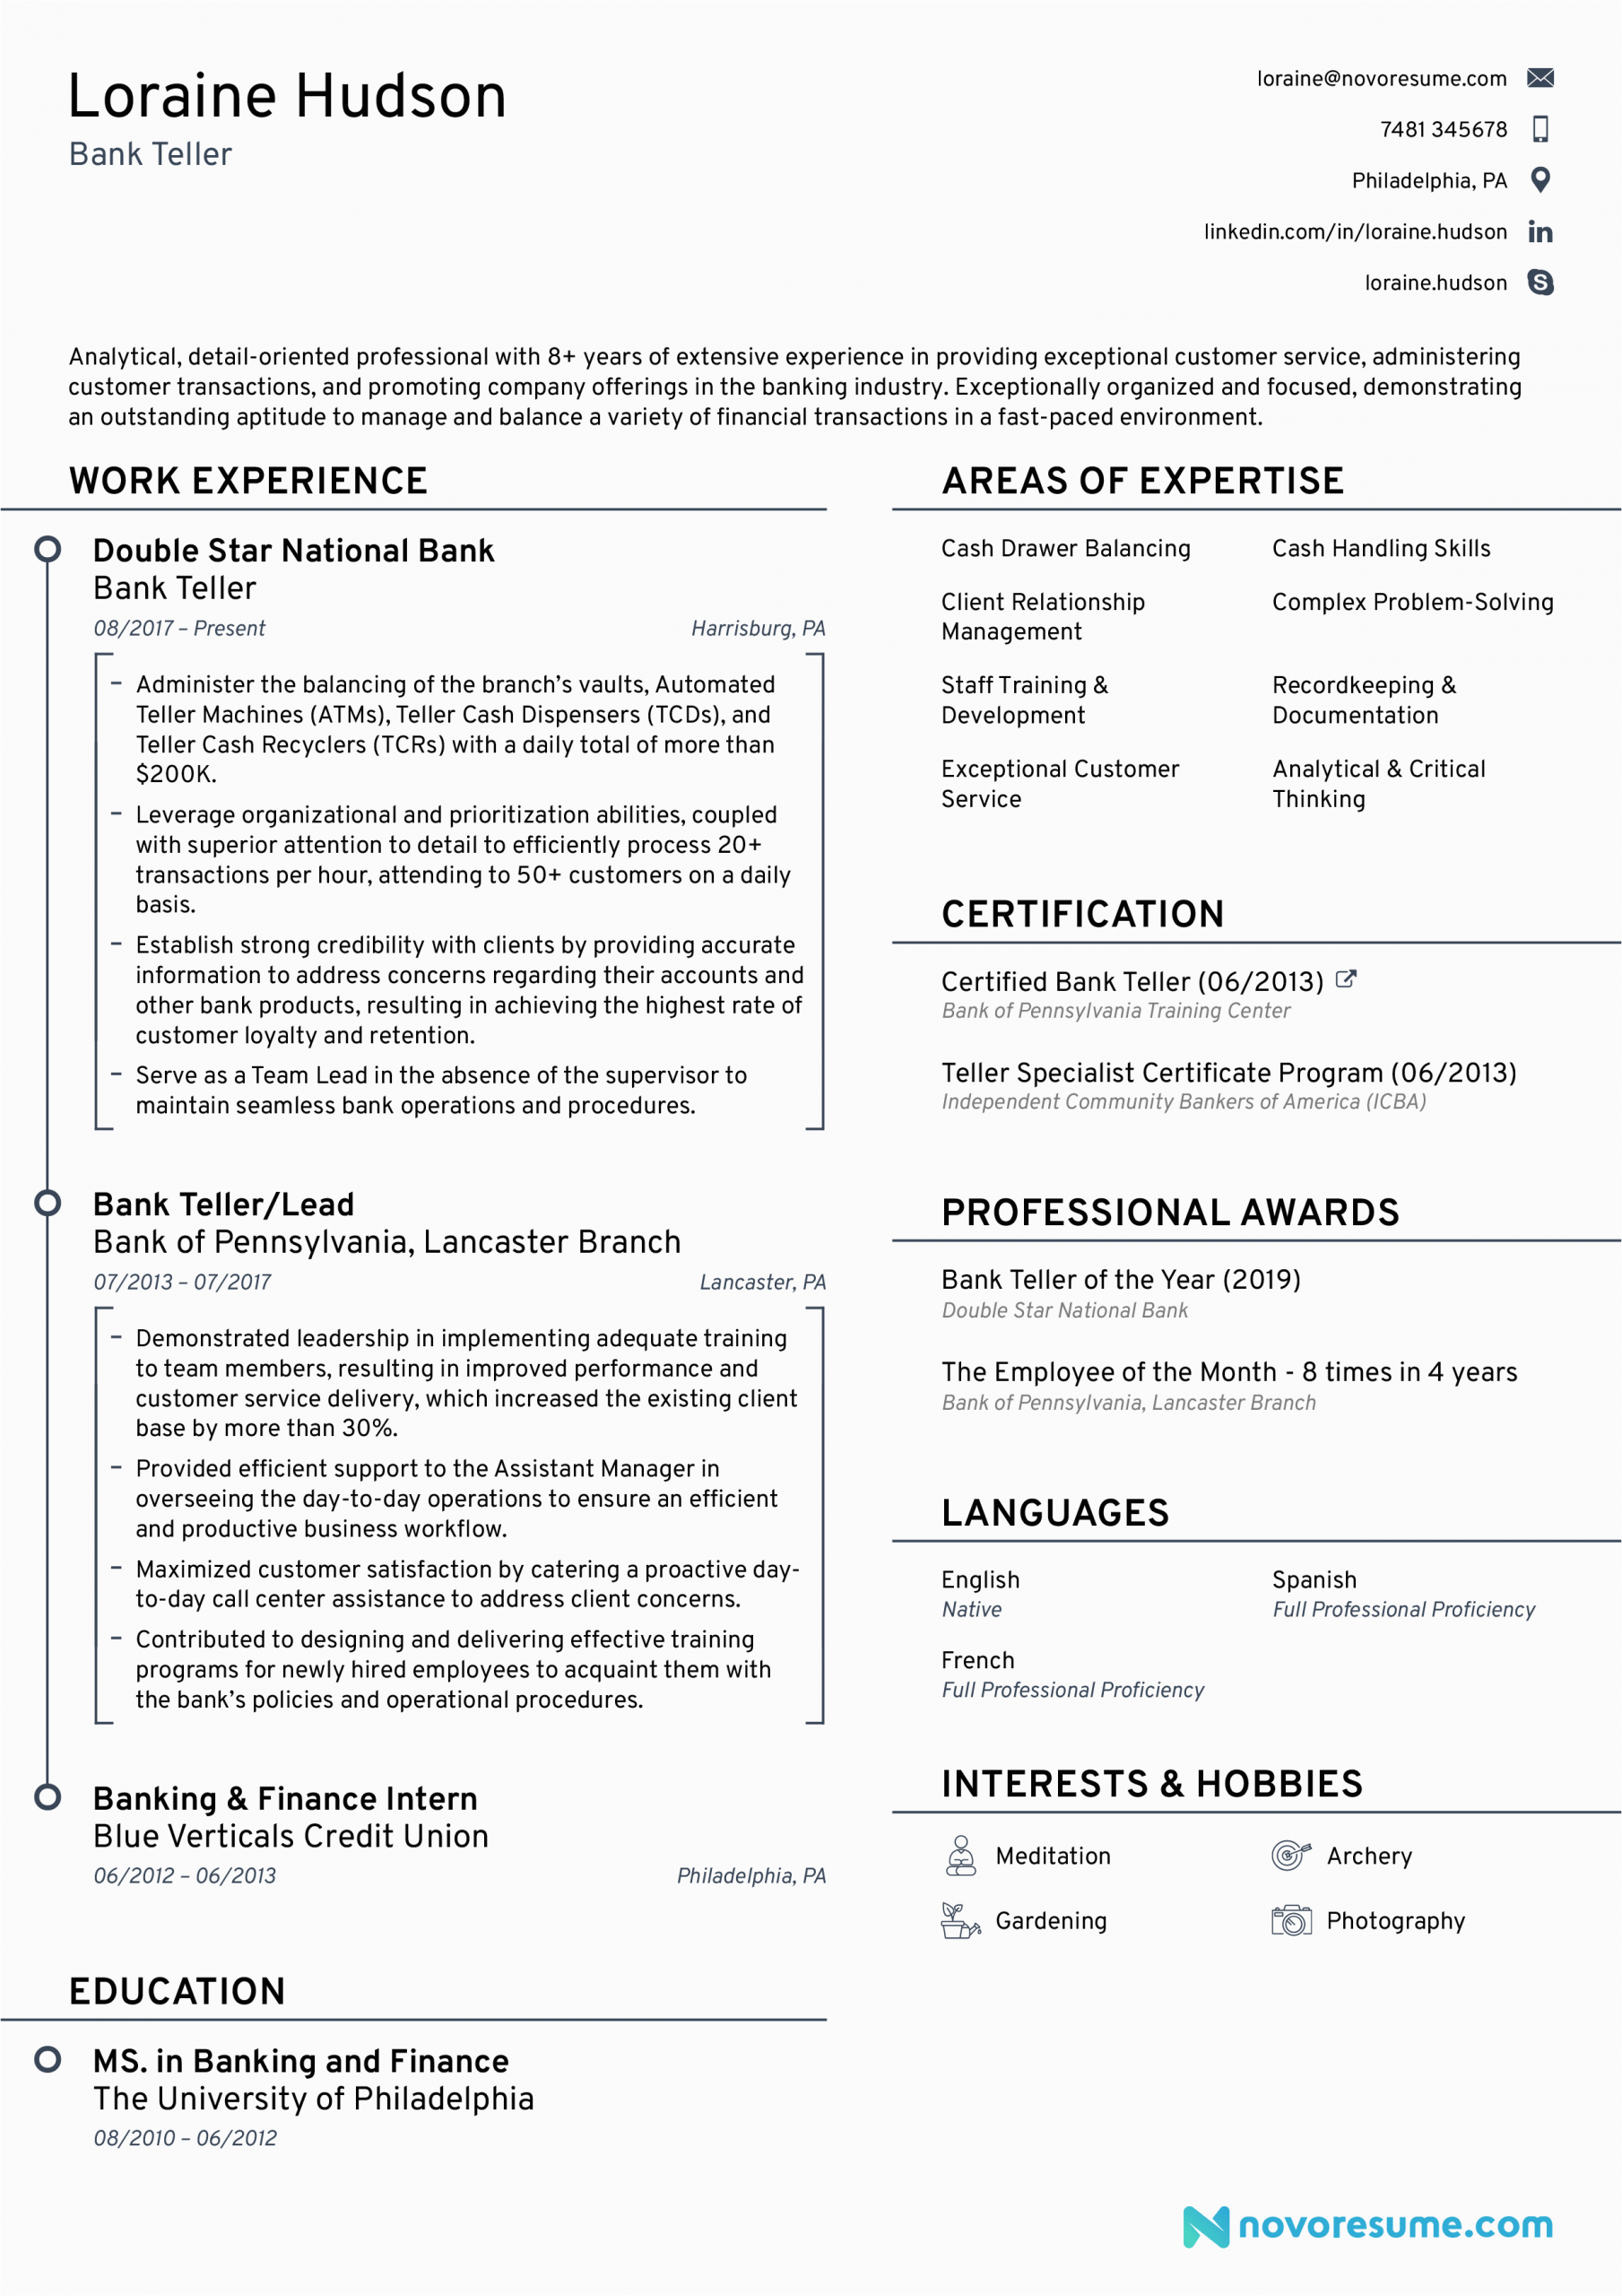 Sample Resume to Apply for Bank Jobs Bank Teller Resume Examples [updated for 2021]